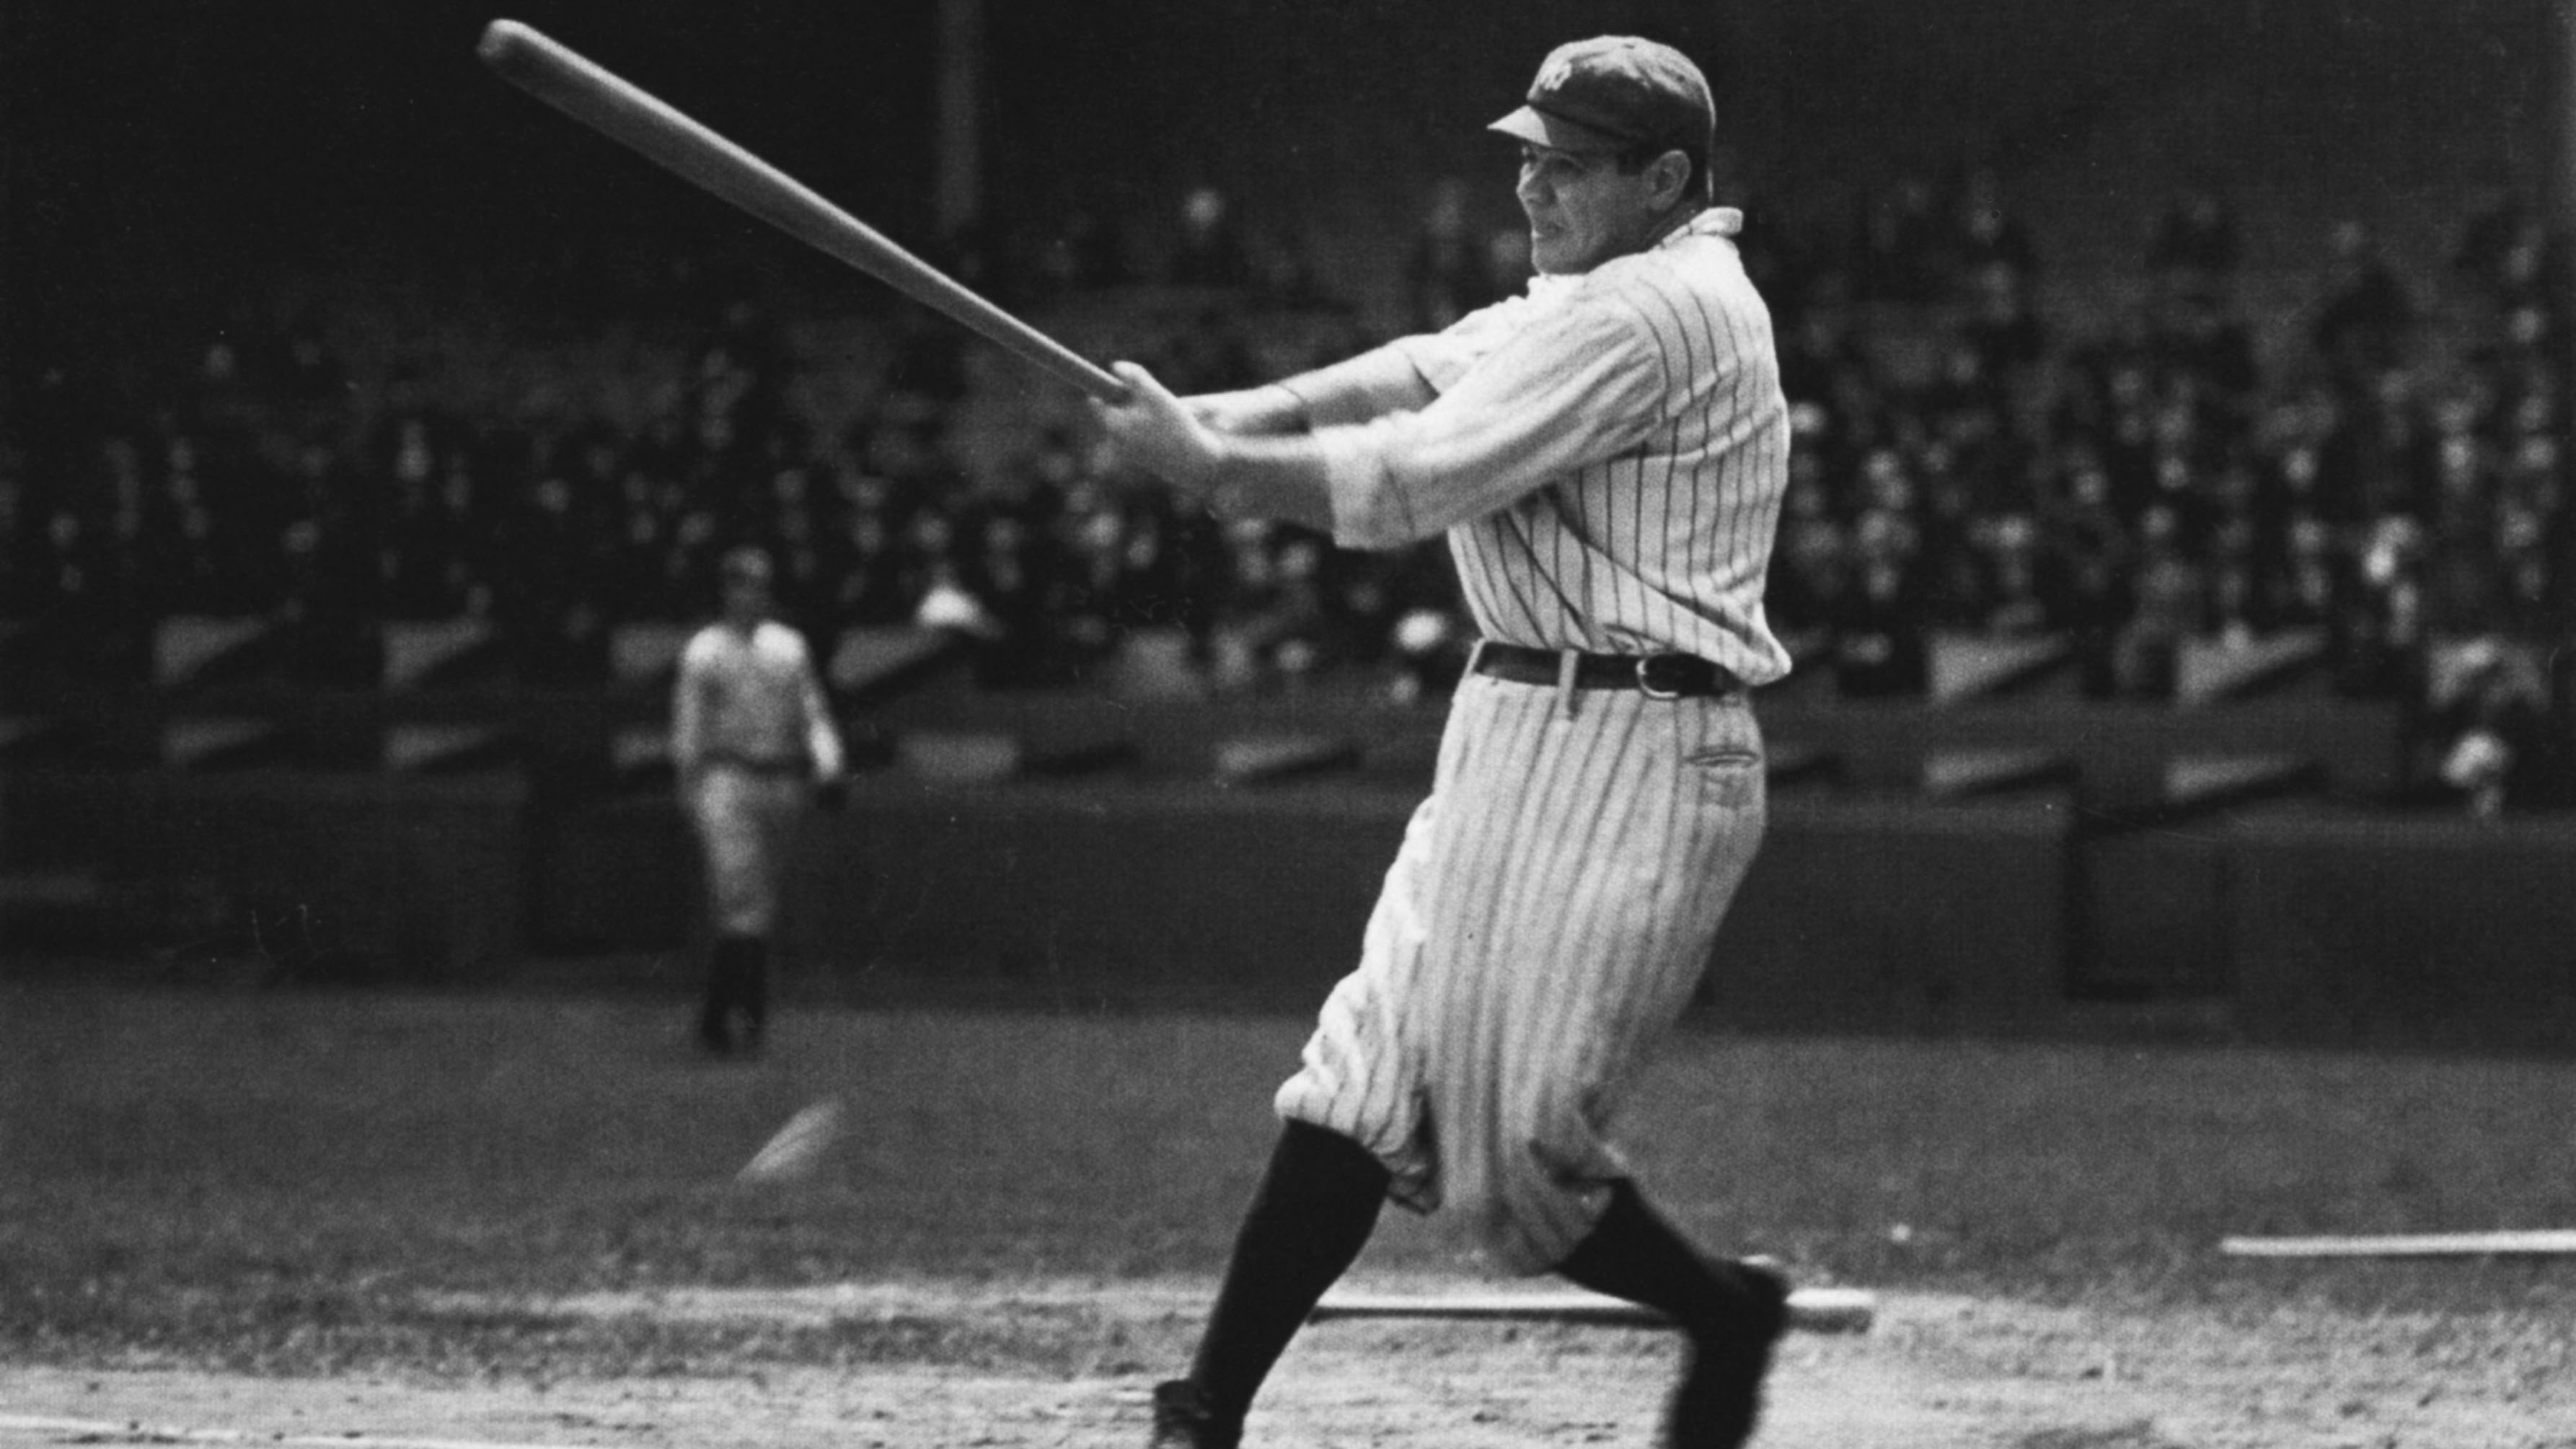 babe ruth in full swing doing what he does best